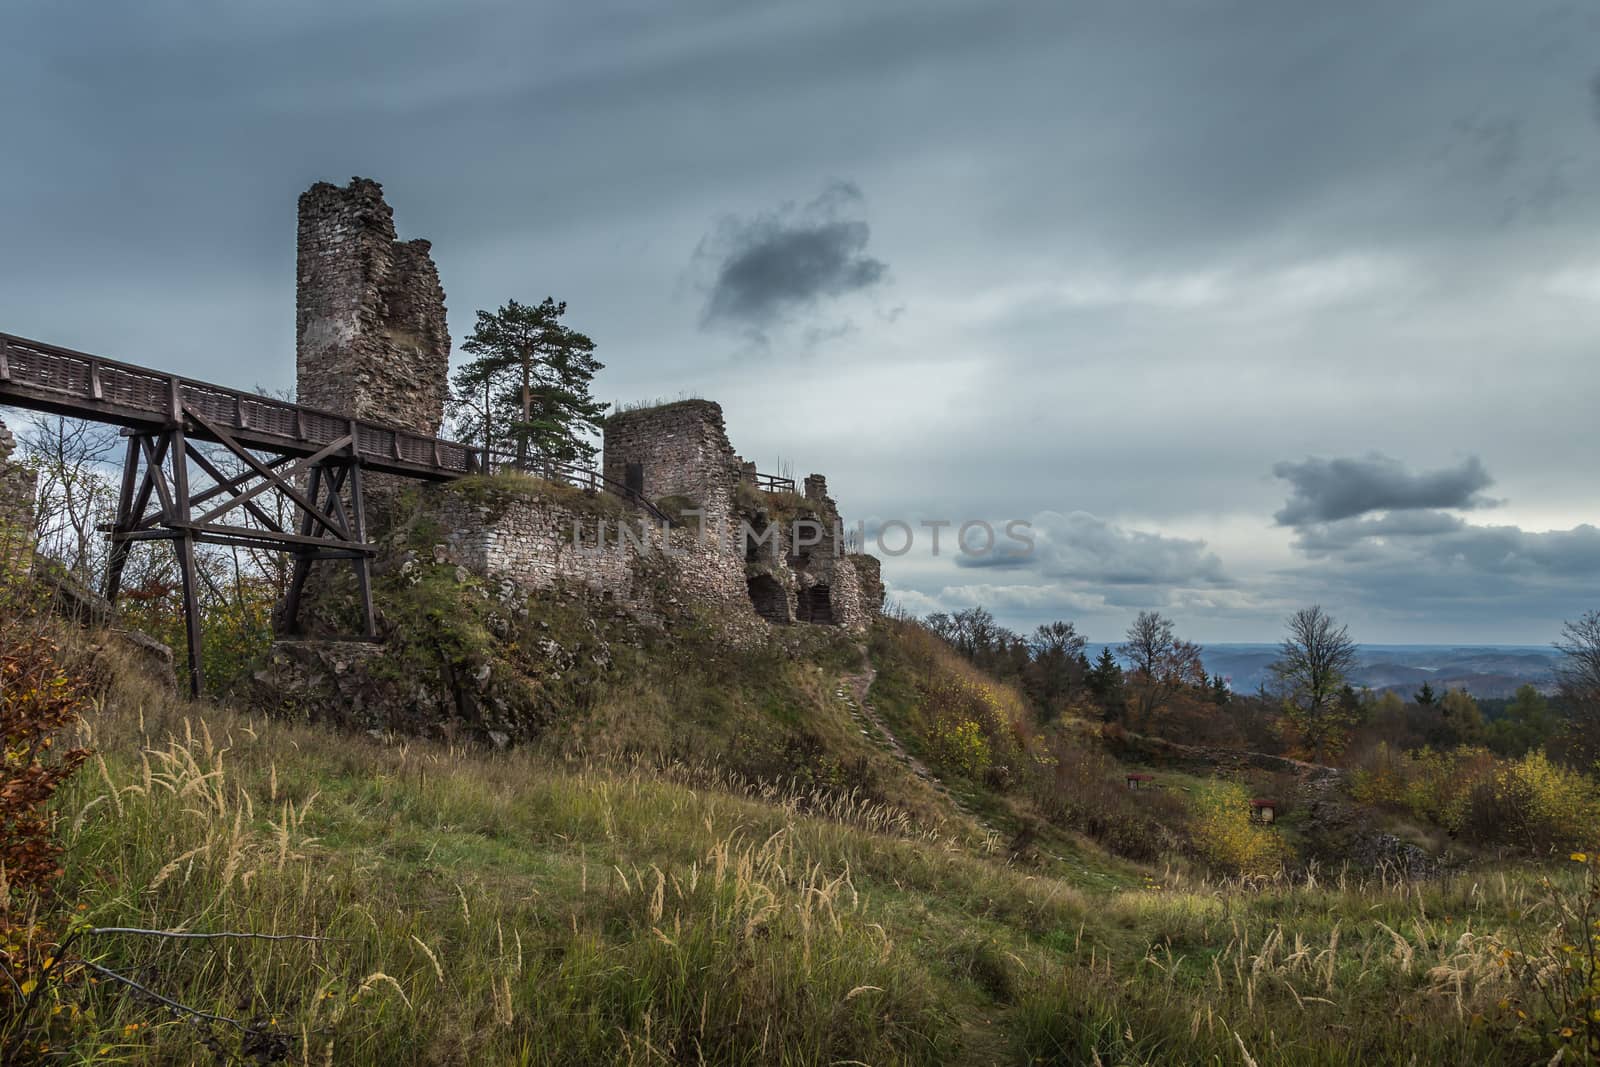 Zubstejn ruins of the castle built in the 13th century. It stands on a hill above the village Pivonice in Czech Republic. Overcast day